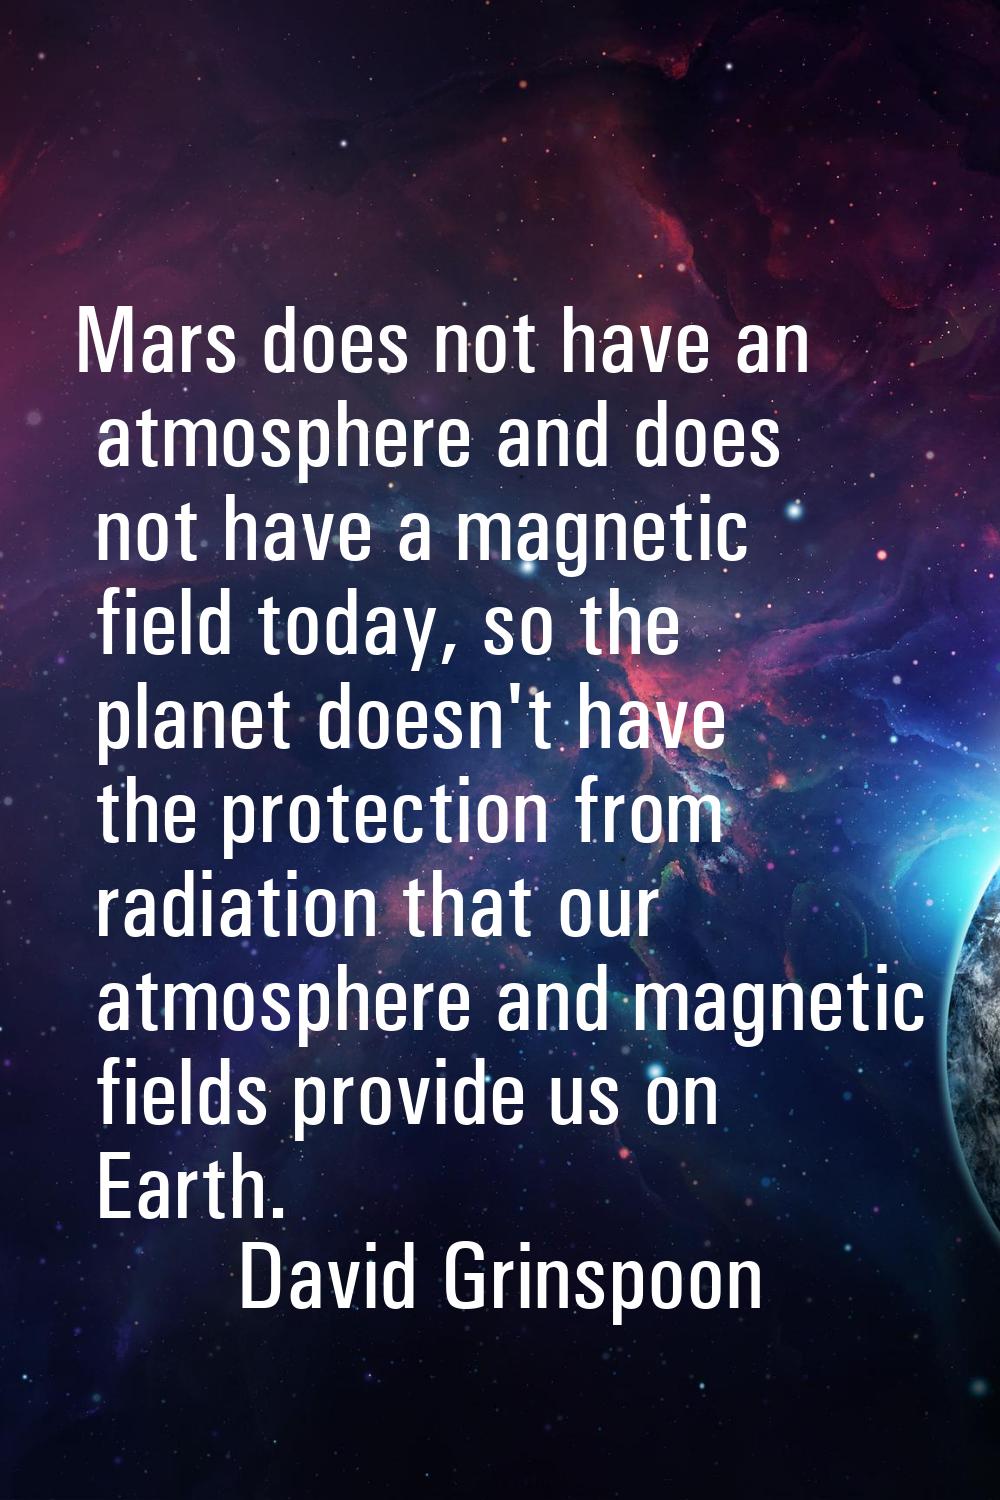 Mars does not have an atmosphere and does not have a magnetic field today, so the planet doesn't ha